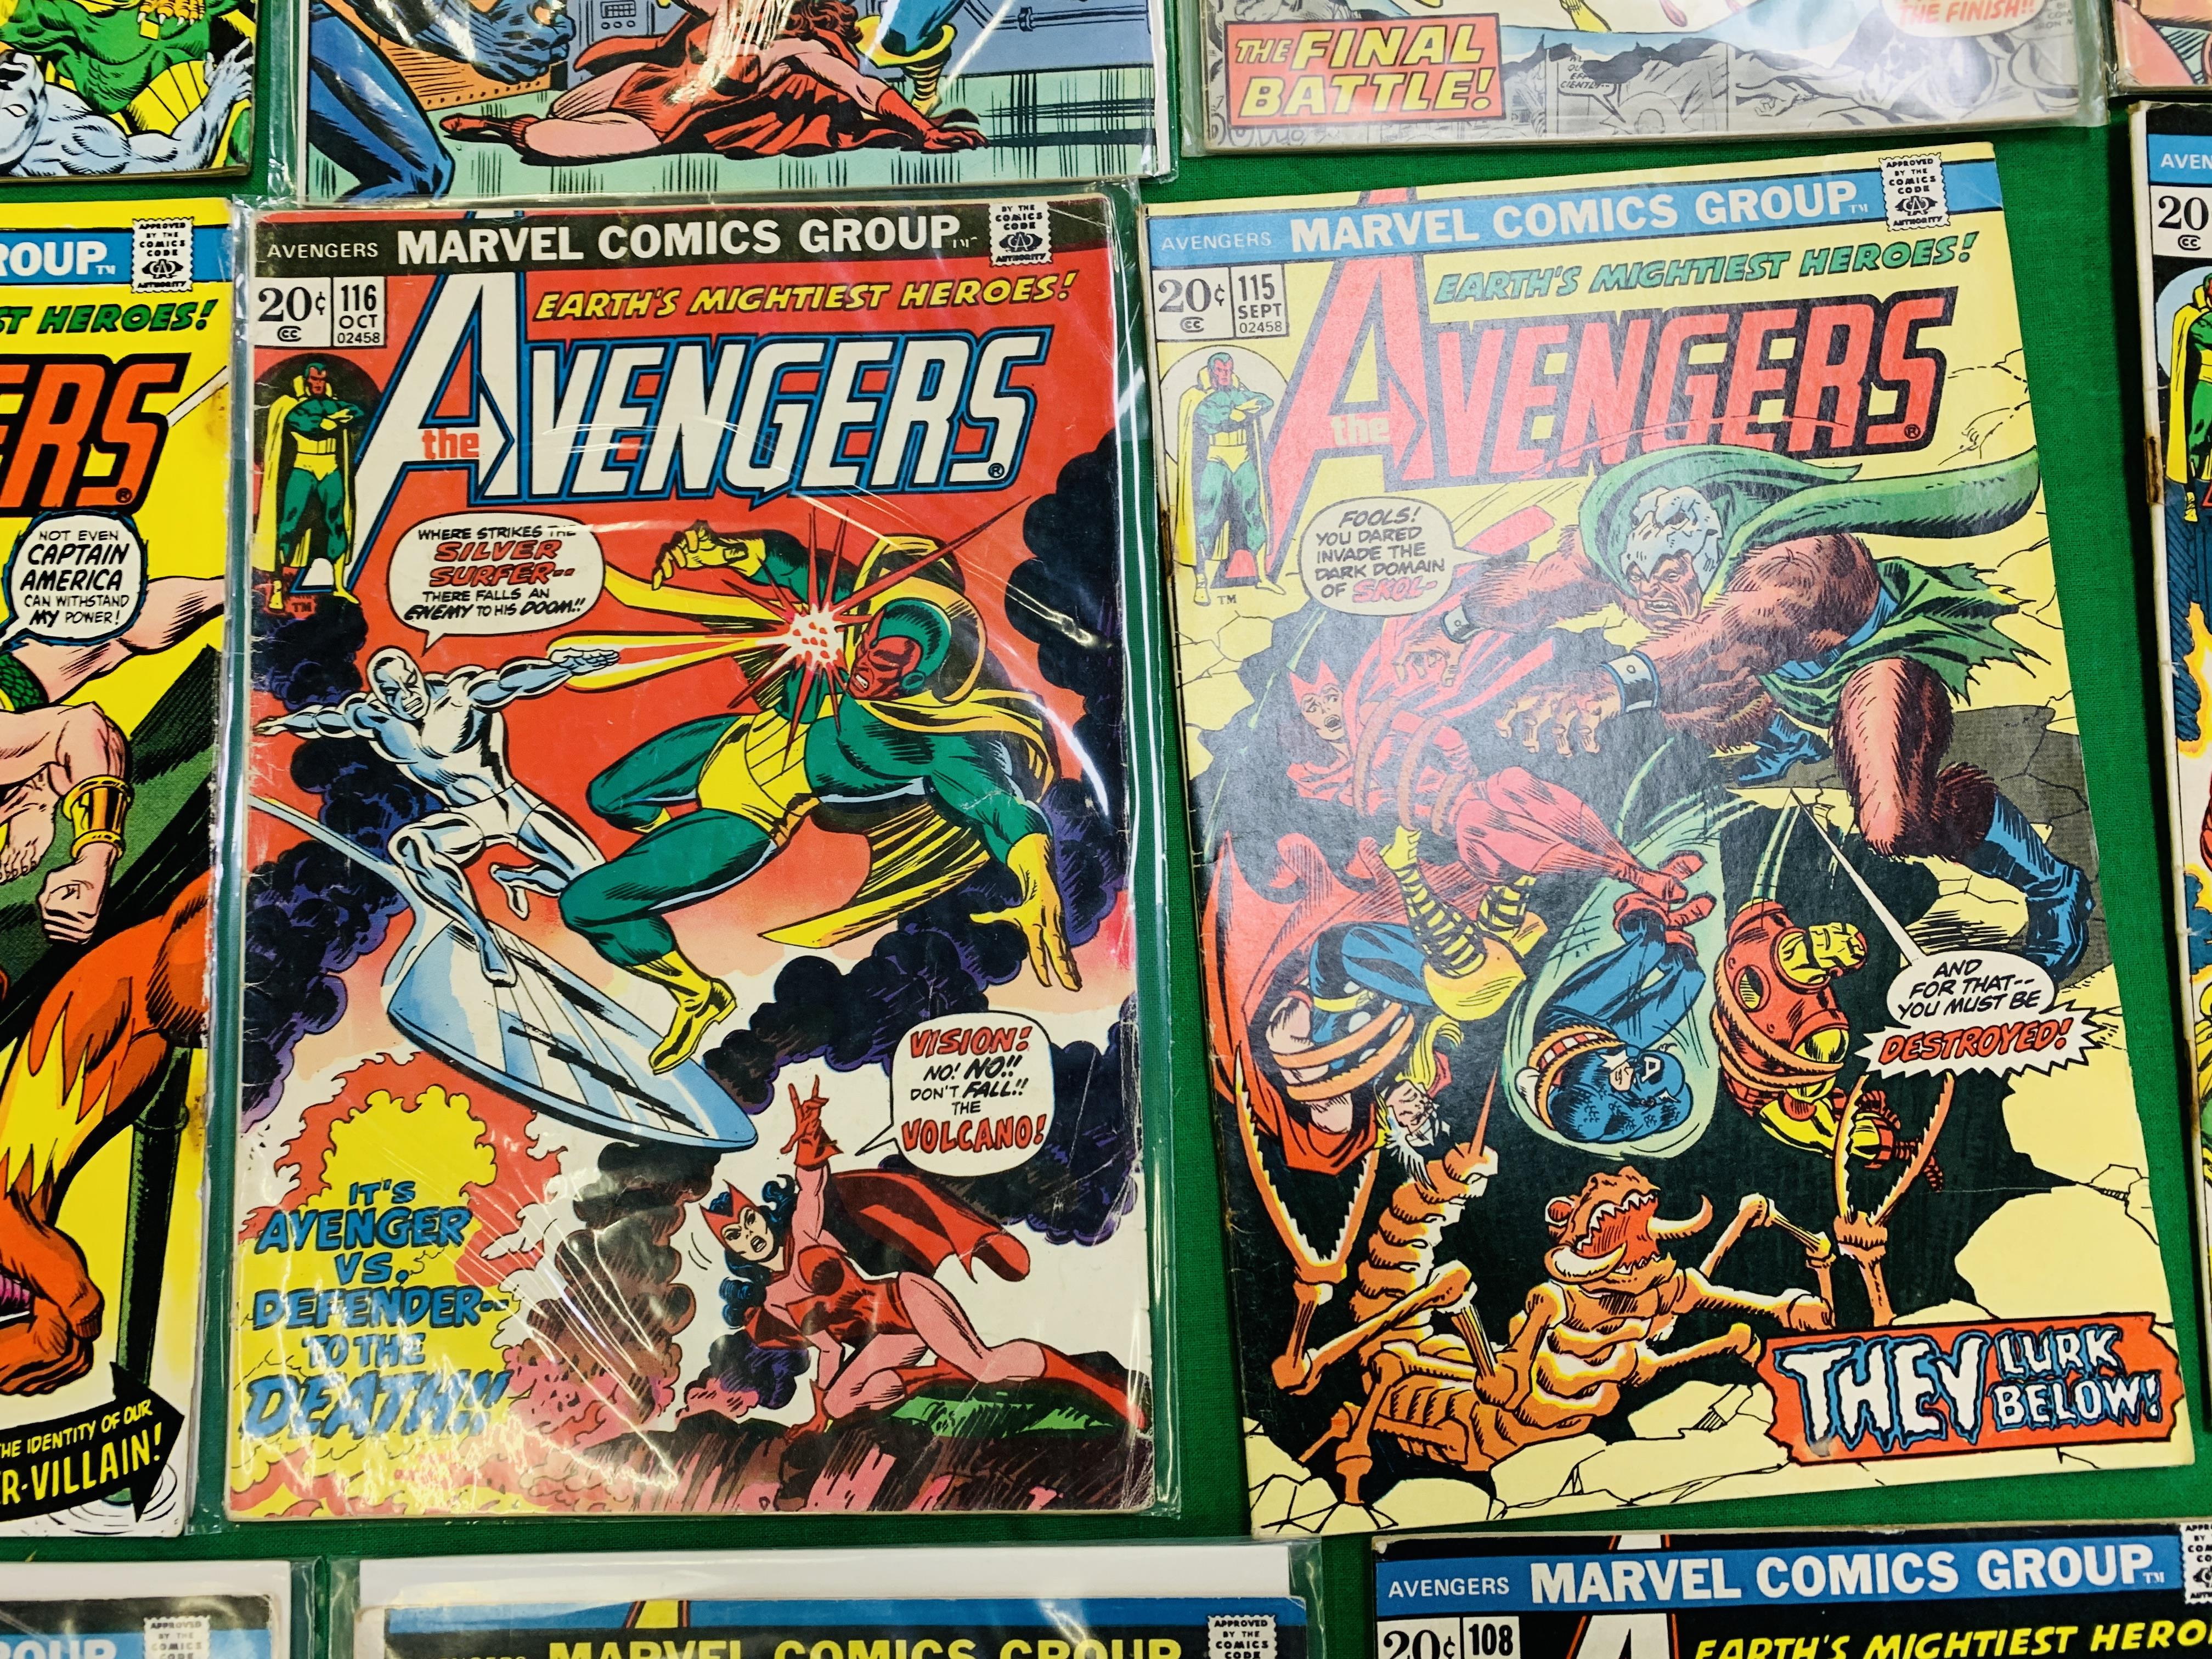 MARVEL COMICS THE AVENGERS NO. 101 - 299, MISSING ISSUES 103 AND 110. - Image 8 of 130